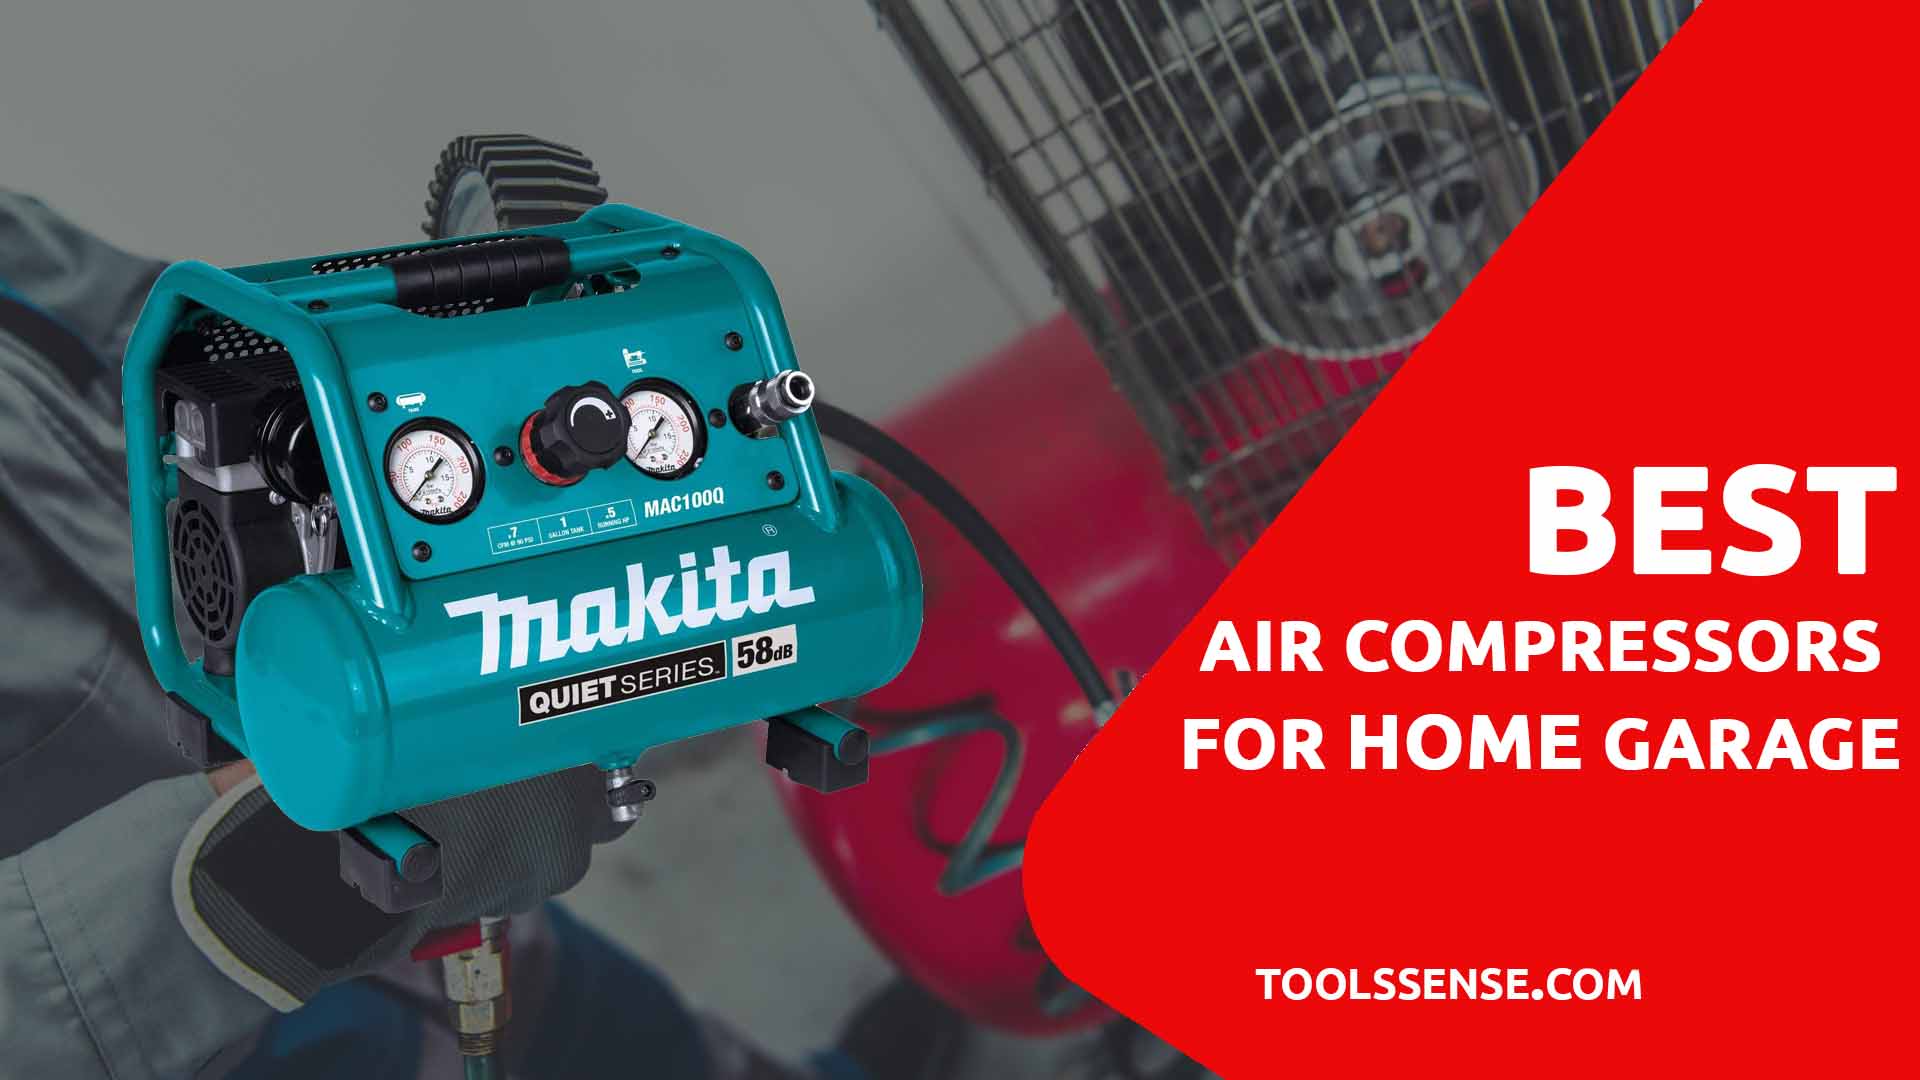 Best-Air-Compressors-for-Home-Garage